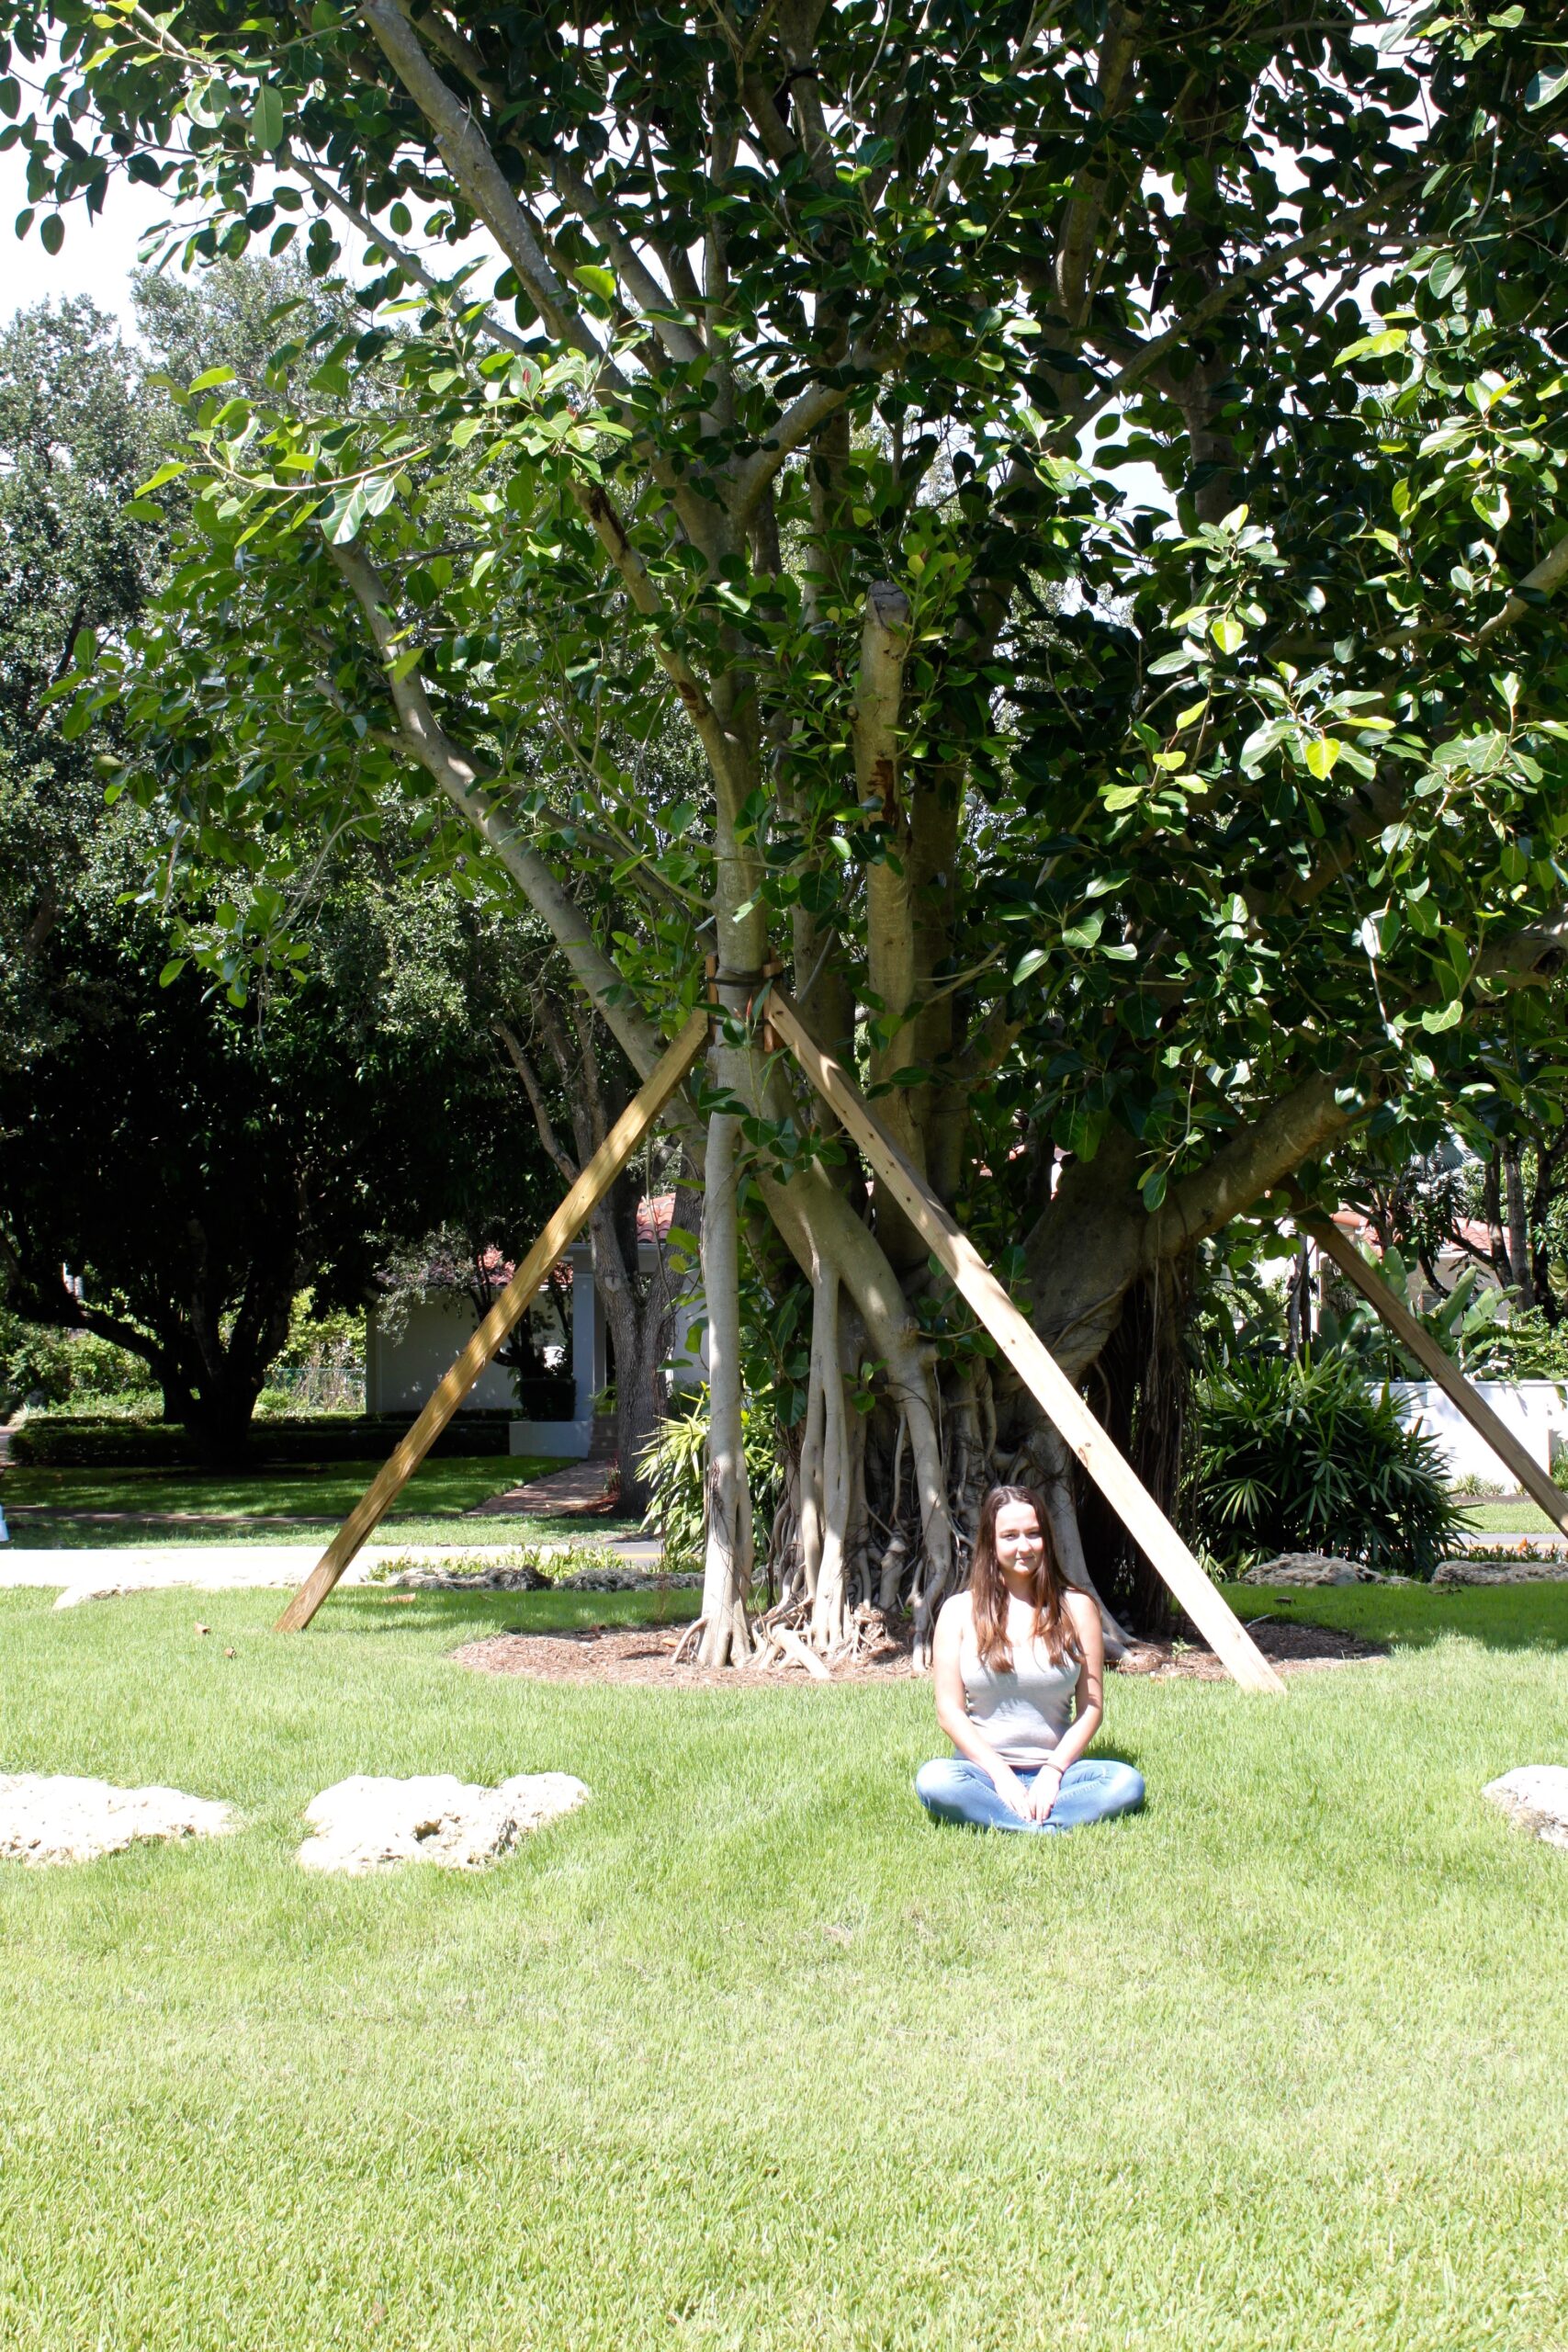 A young woman sits cross-legged in front of a newly planted tree with beams supporting the trunk.